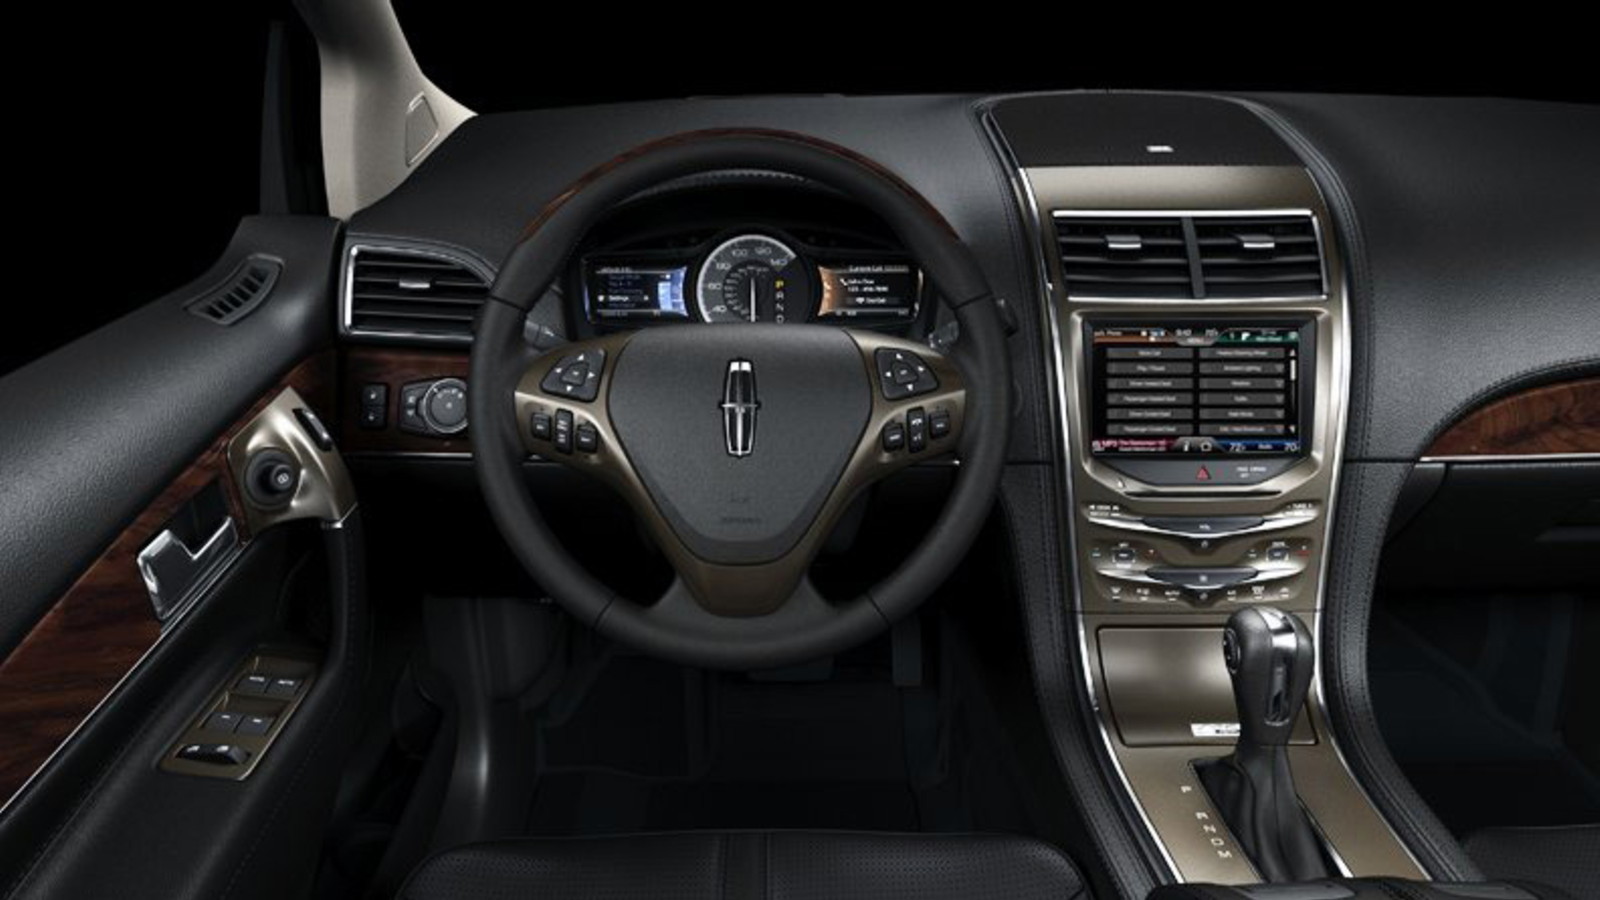 MyLincoln Touch - 2011 Lincoln MKX